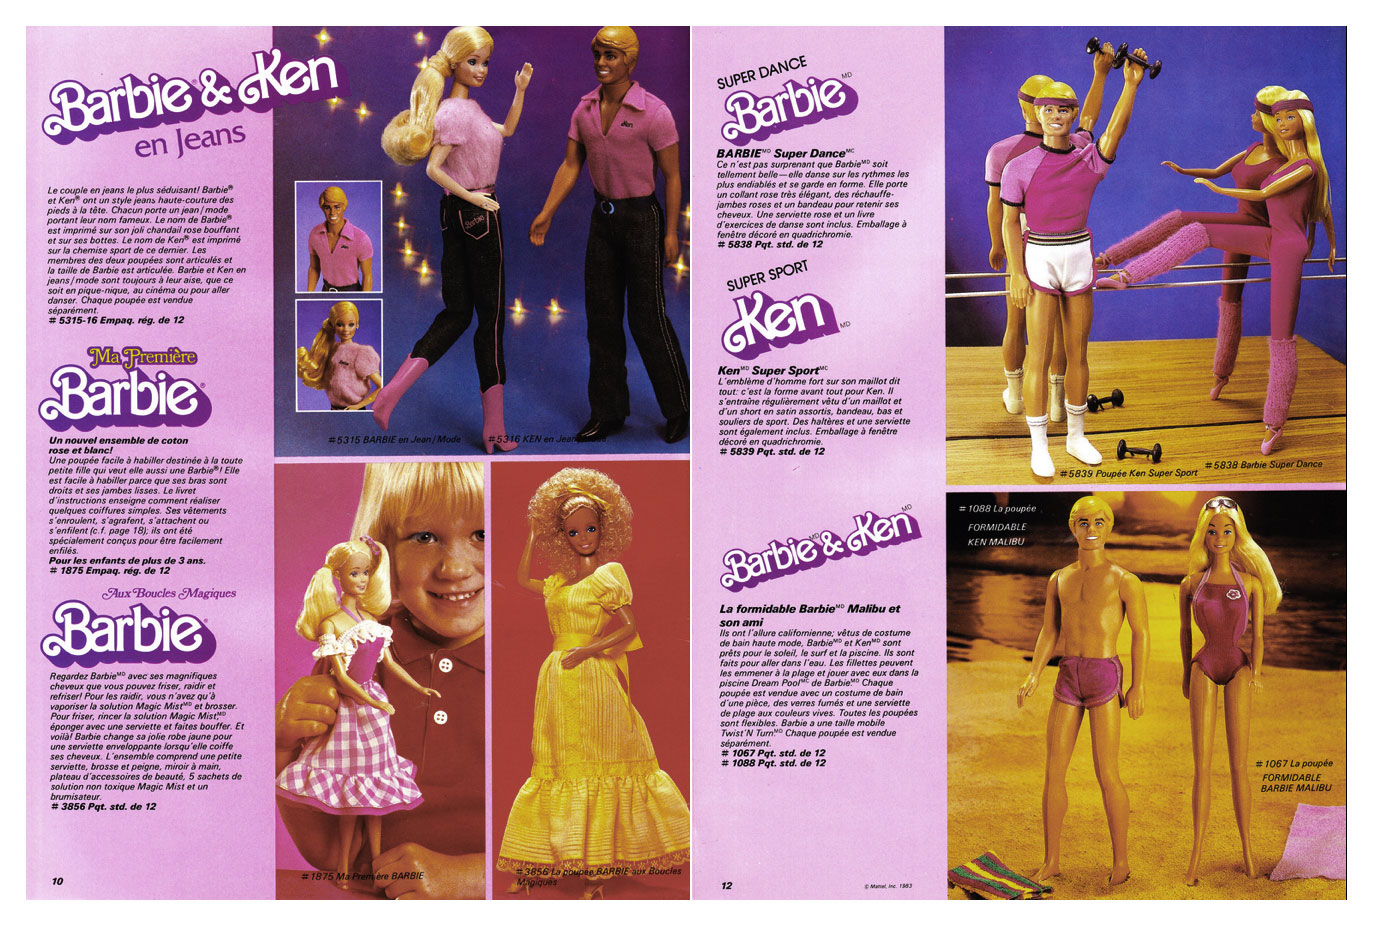 From 1983 Canadian Mattel Toys catalogue